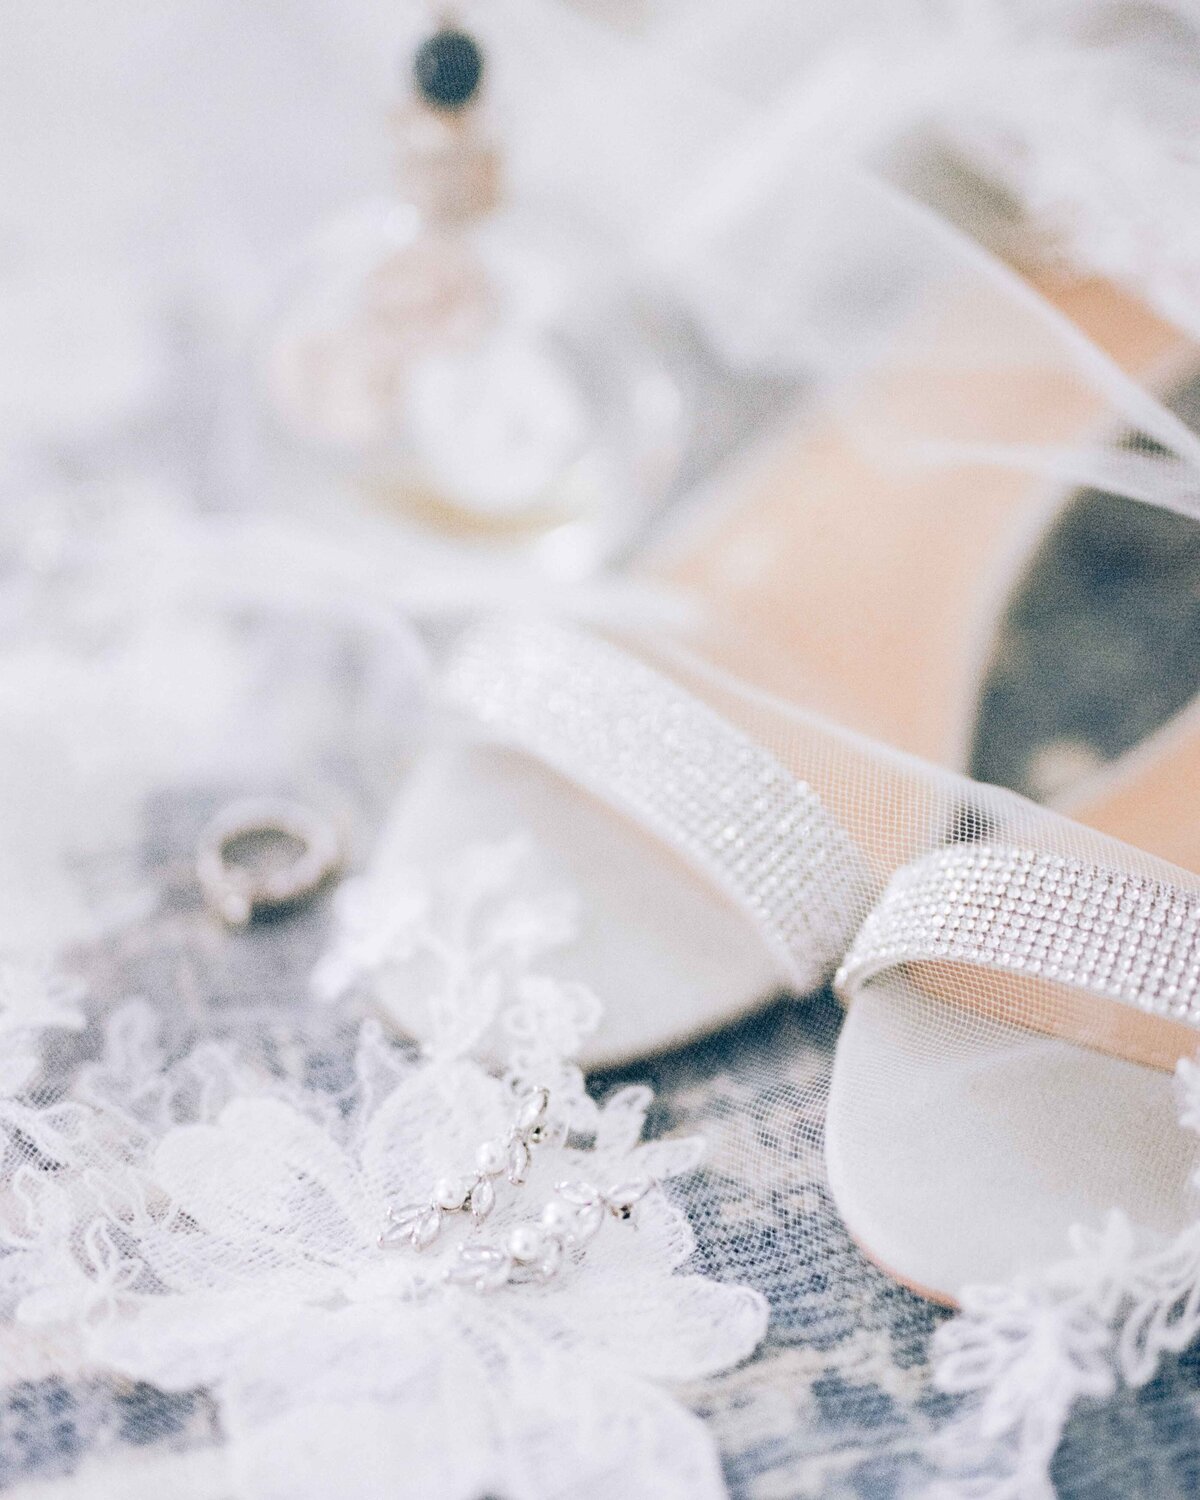 Bride's Veil, Shoes, Rings, and Perfume During  Wedding Day Preparation Detail